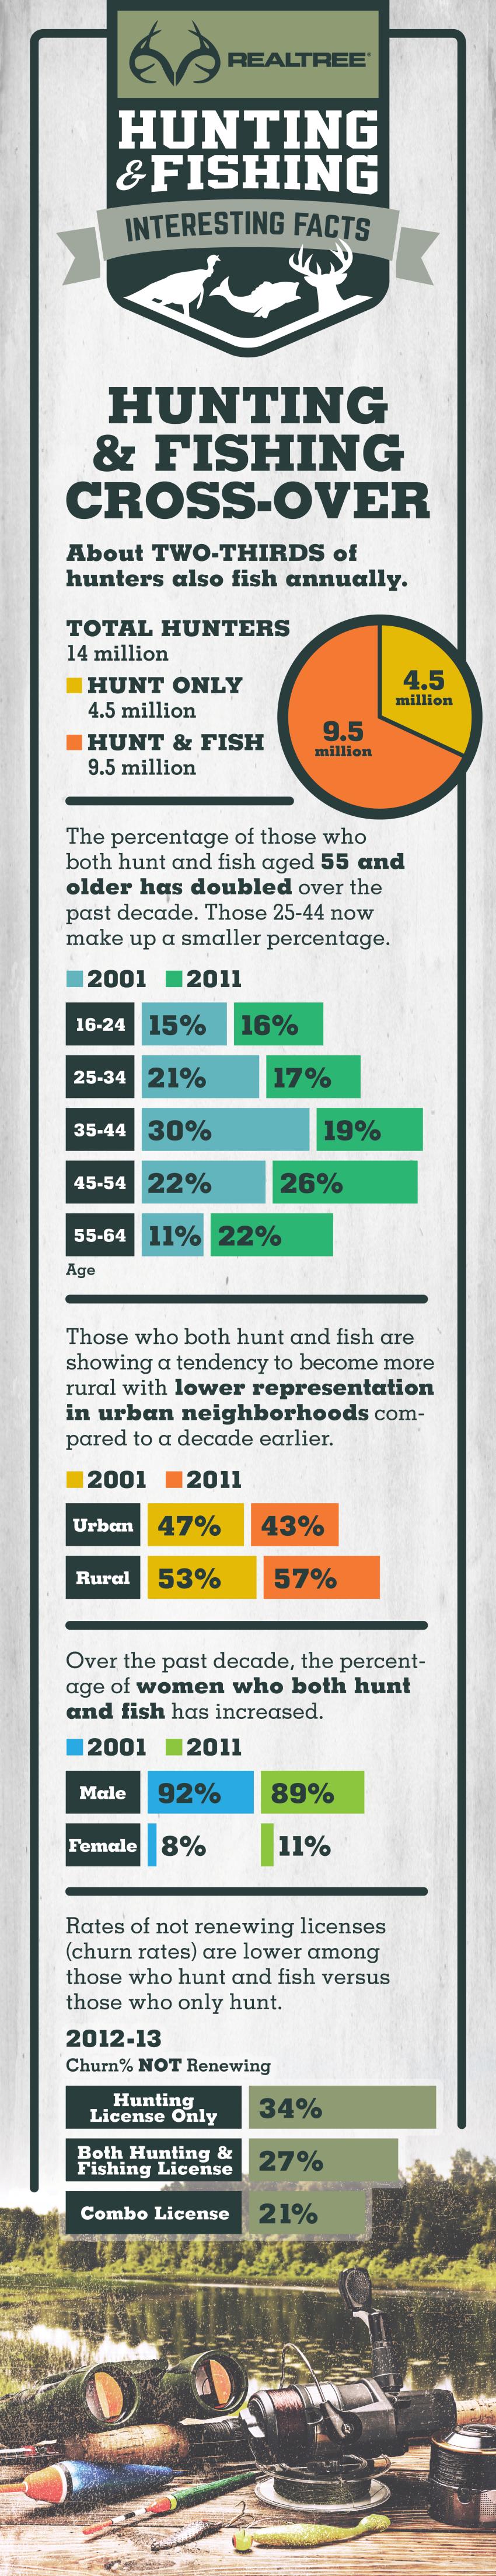 hunting and fishing crossover 2016 infographic | Realtree B2B